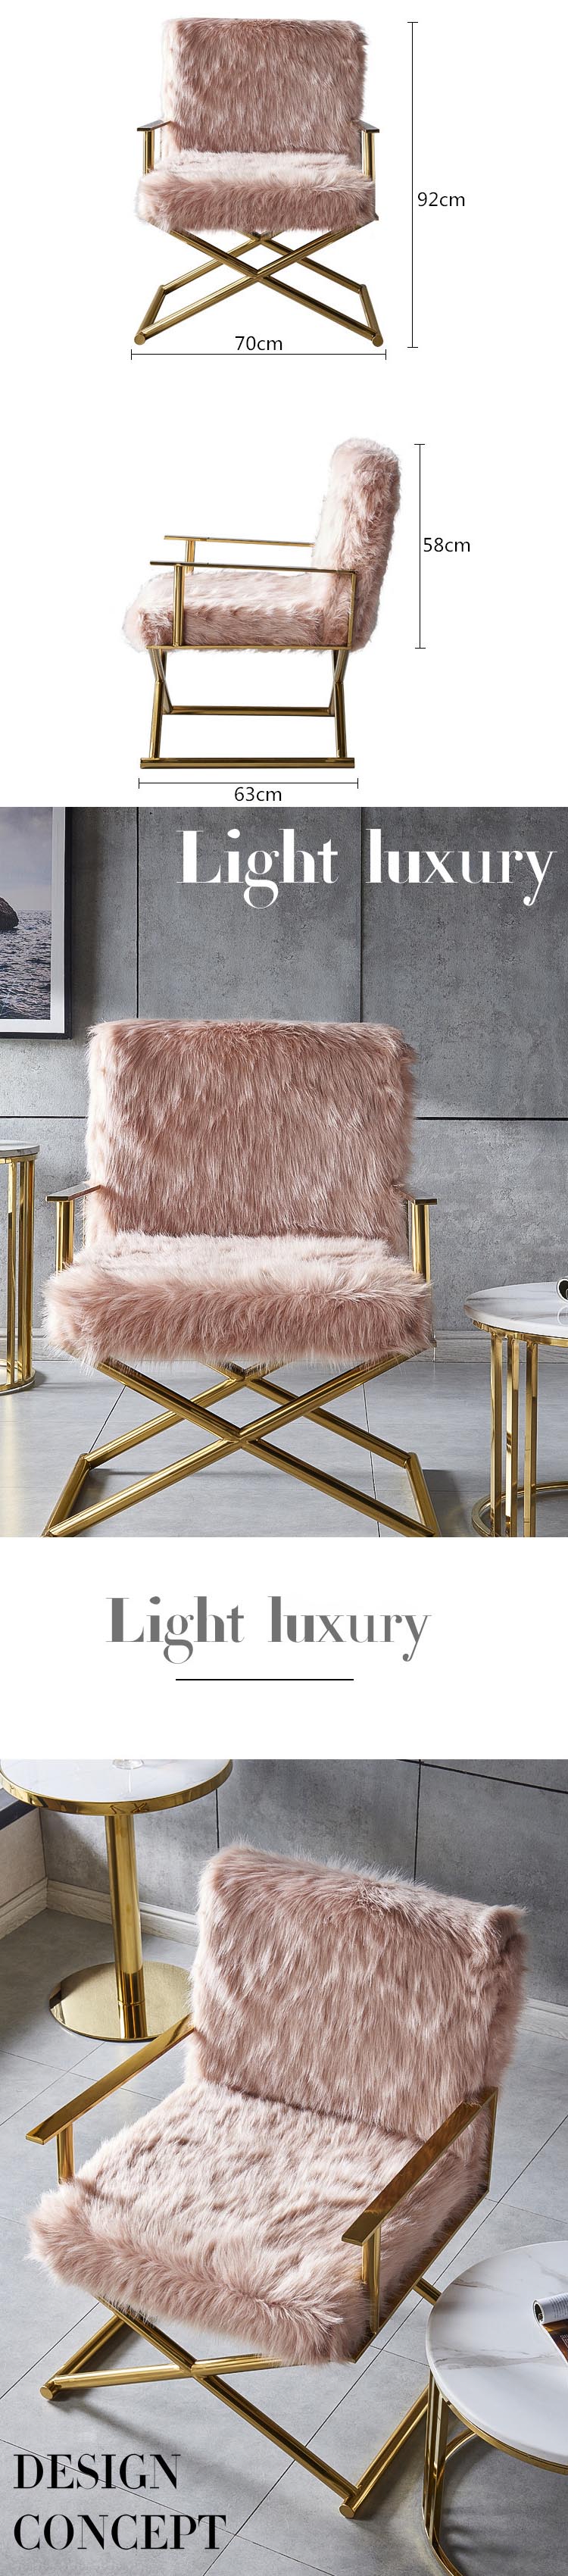 Factory Price Living Room Shiny Gold Stainless Steel Frame Fur Leisure Chair Armchair for Home Hotel Furniture metal cha